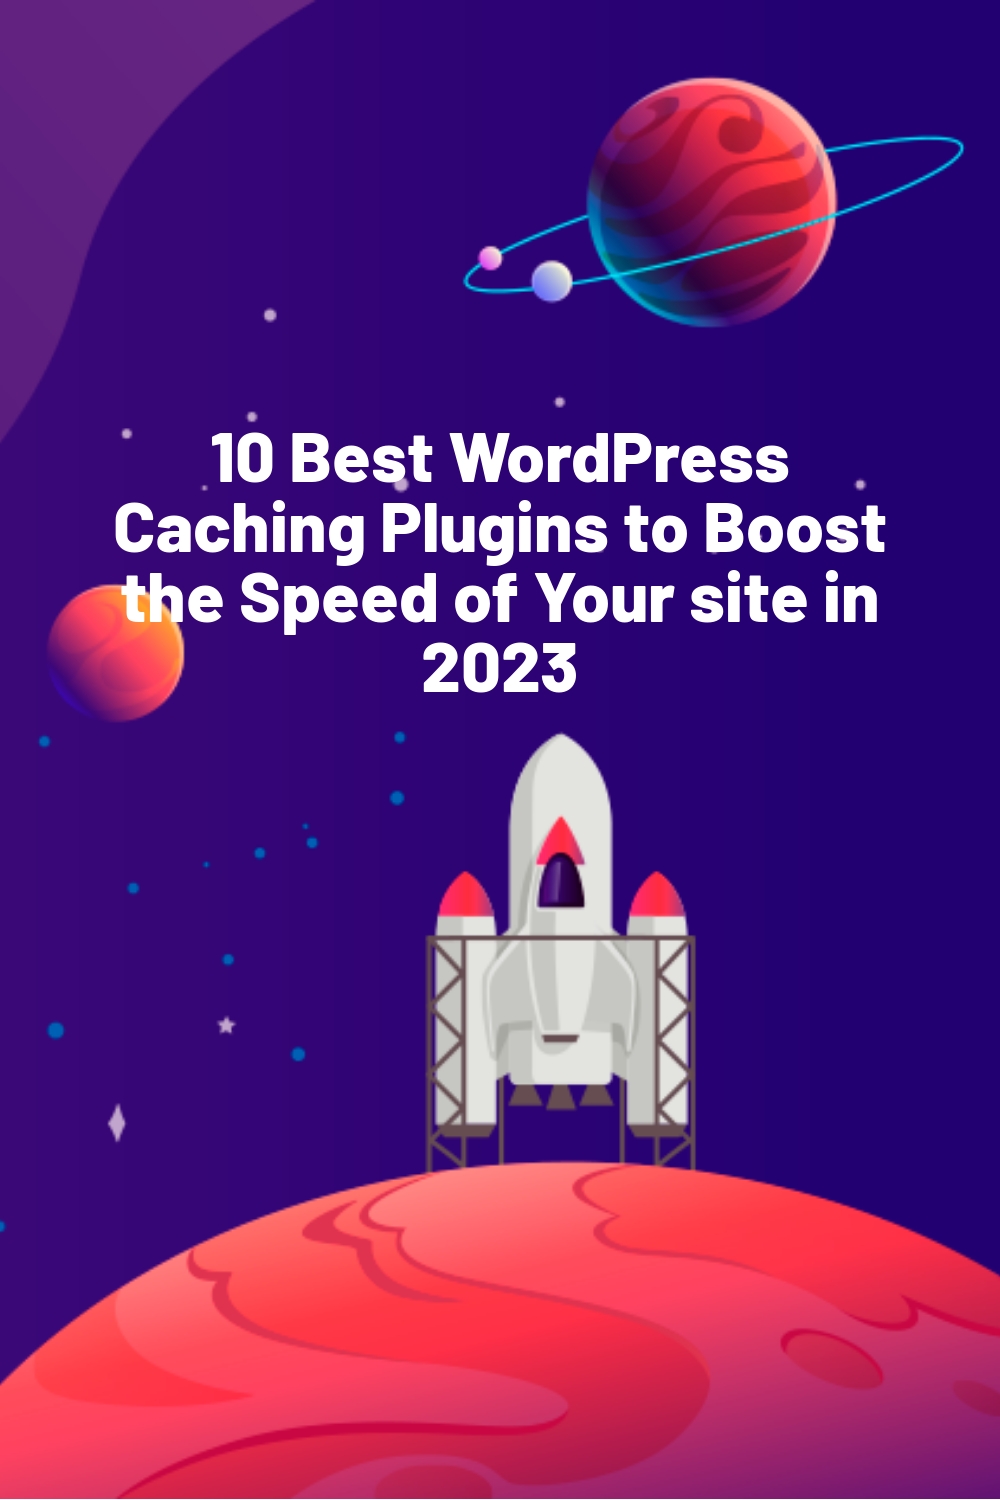 10 Best WordPress Caching Plugins to Boost the Speed of Your site in 2023